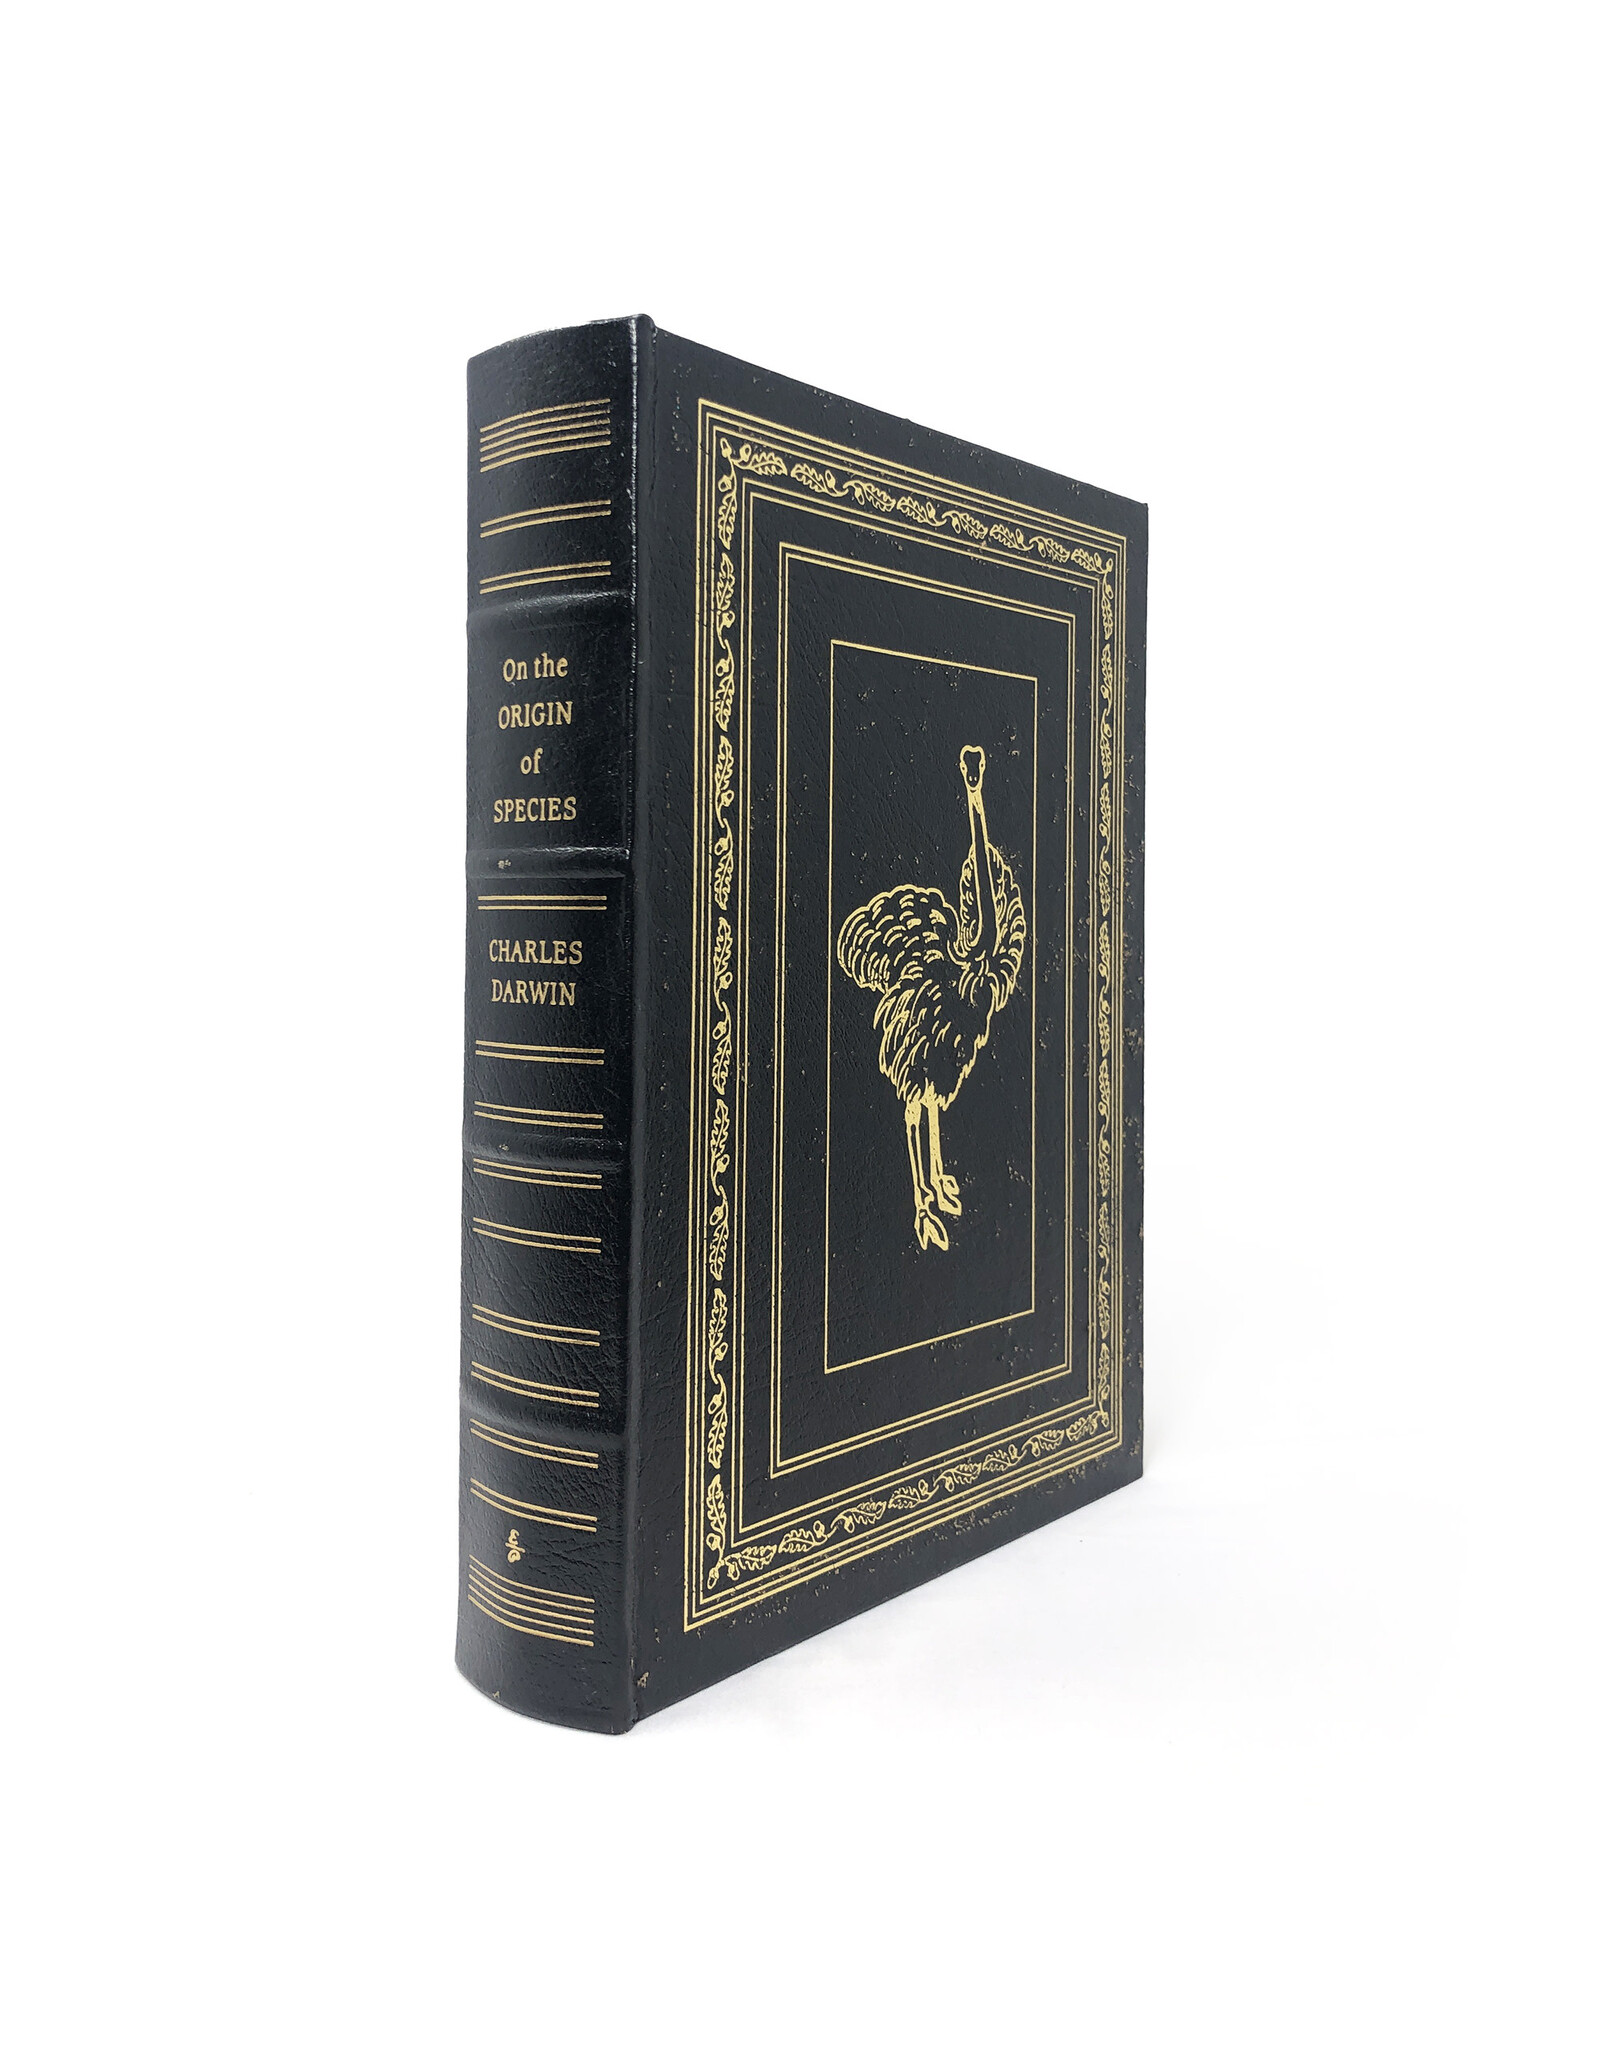 Easton Press On the Origin of Species Easton Press 100 Greatest Books Ever Written Deluxe Leather Edition